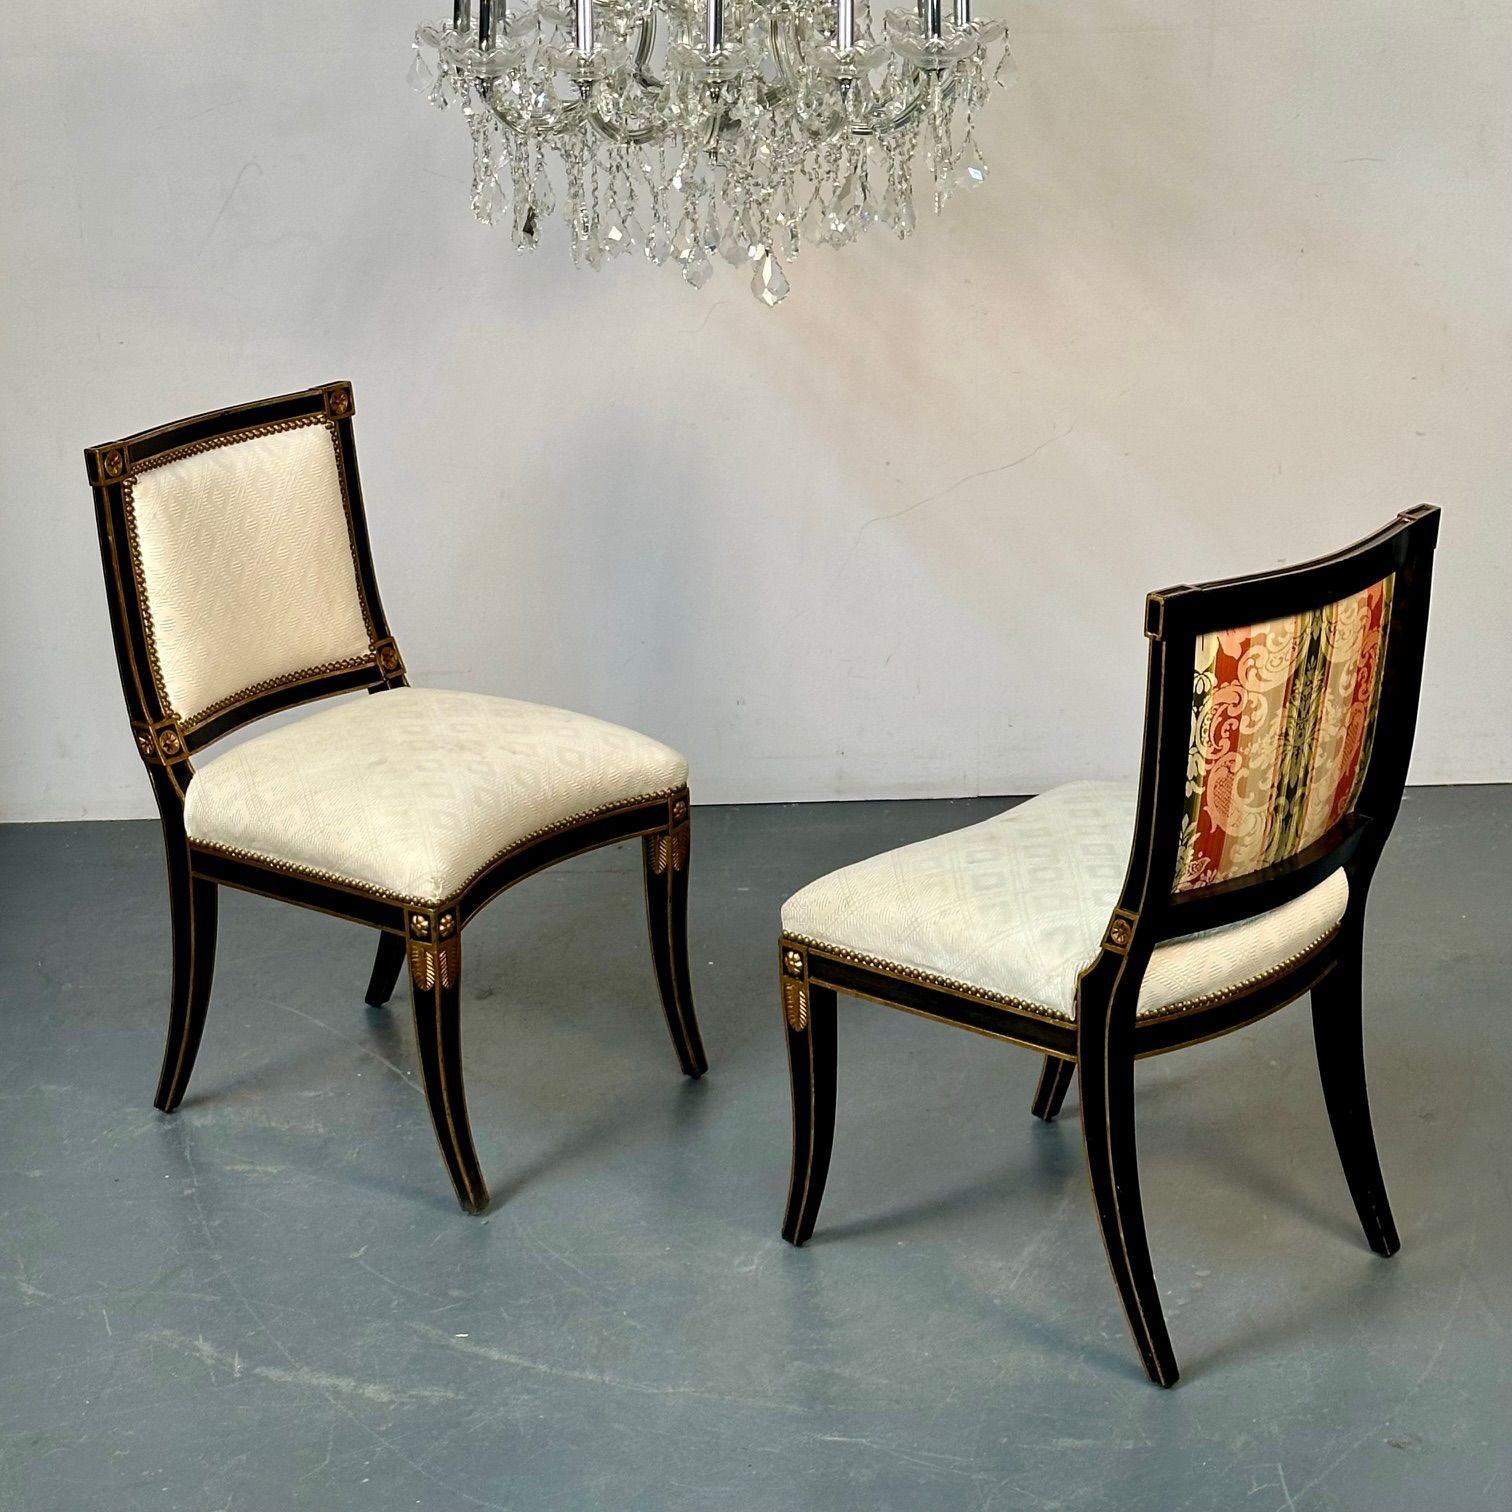 Pair of Louis XVI Maison Jansen Style Dining / Side Chairs, Ebony and Giltwood In Good Condition For Sale In Stamford, CT